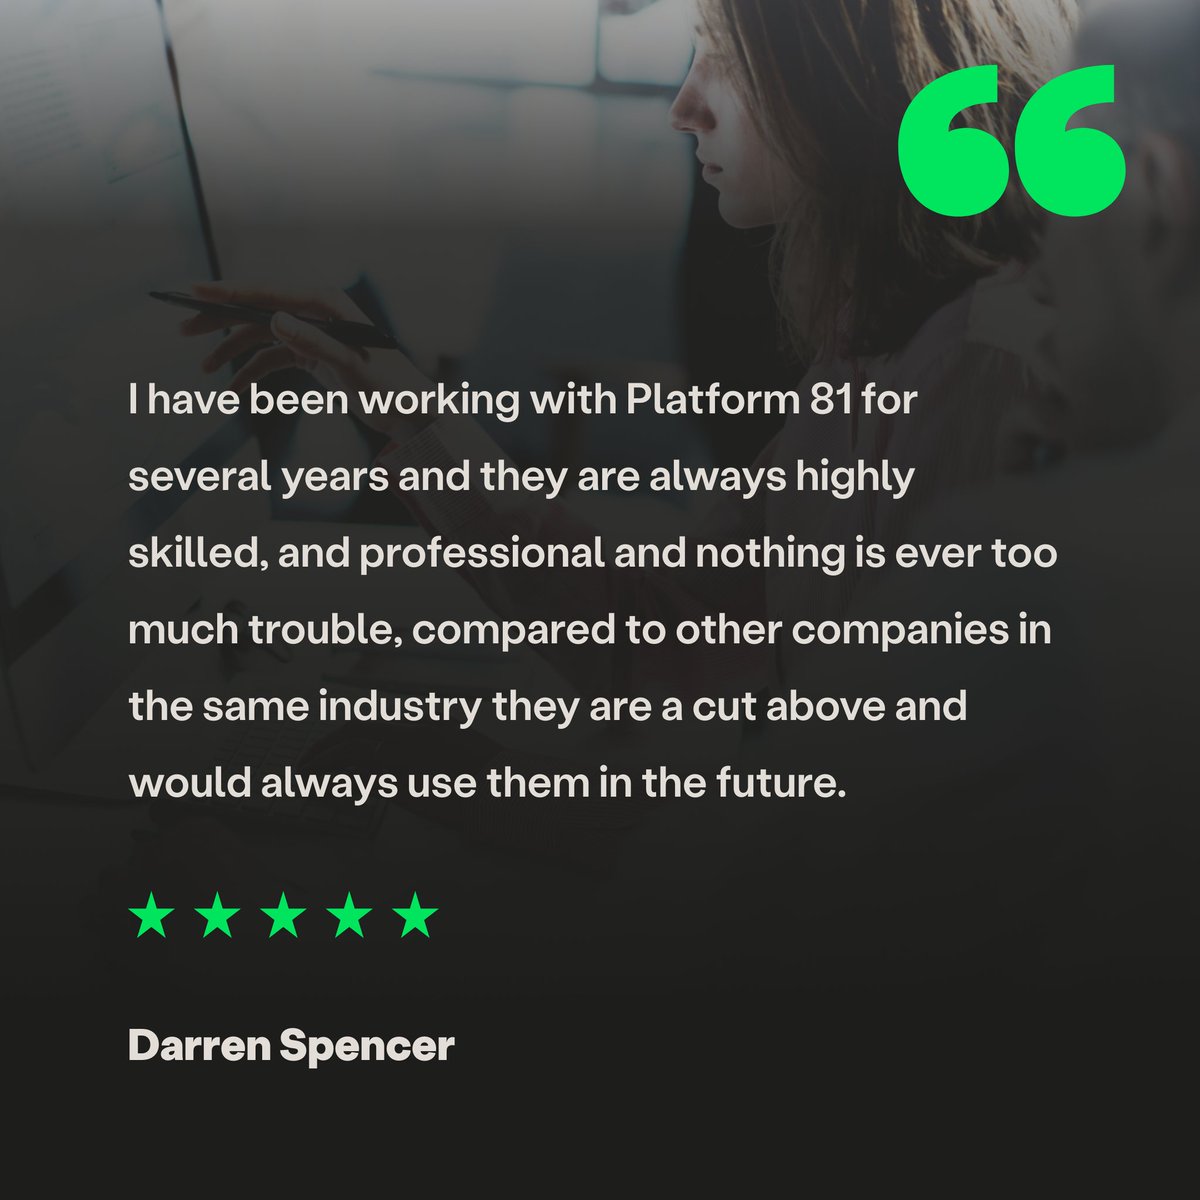 Another cracking review 👏 

Well done team, keep up the brilliant work 💪 

#Platform81 #DigitalAgency #ClientReview